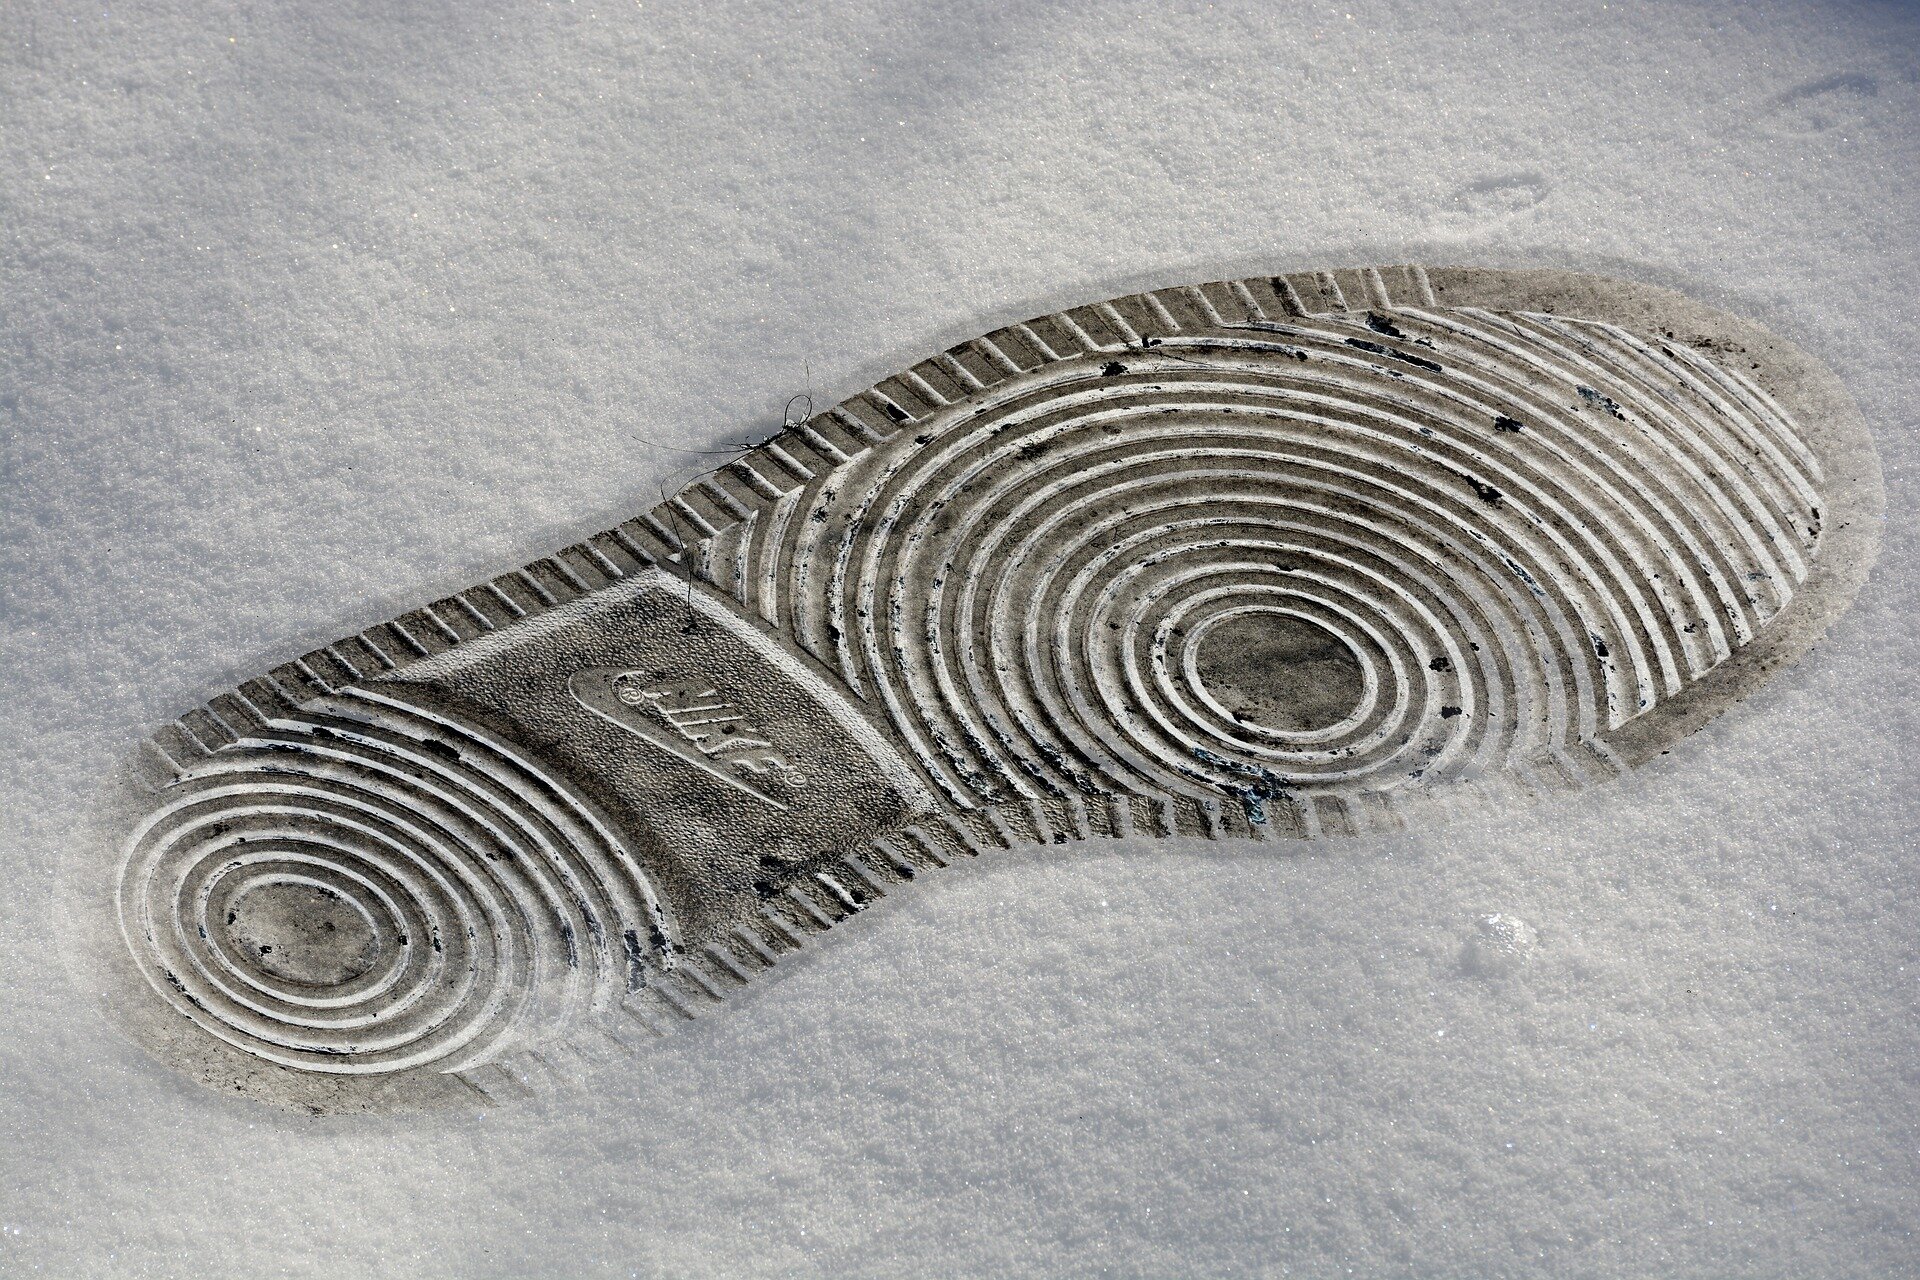 #How automation is assisting forensic scientists in shoe print identification